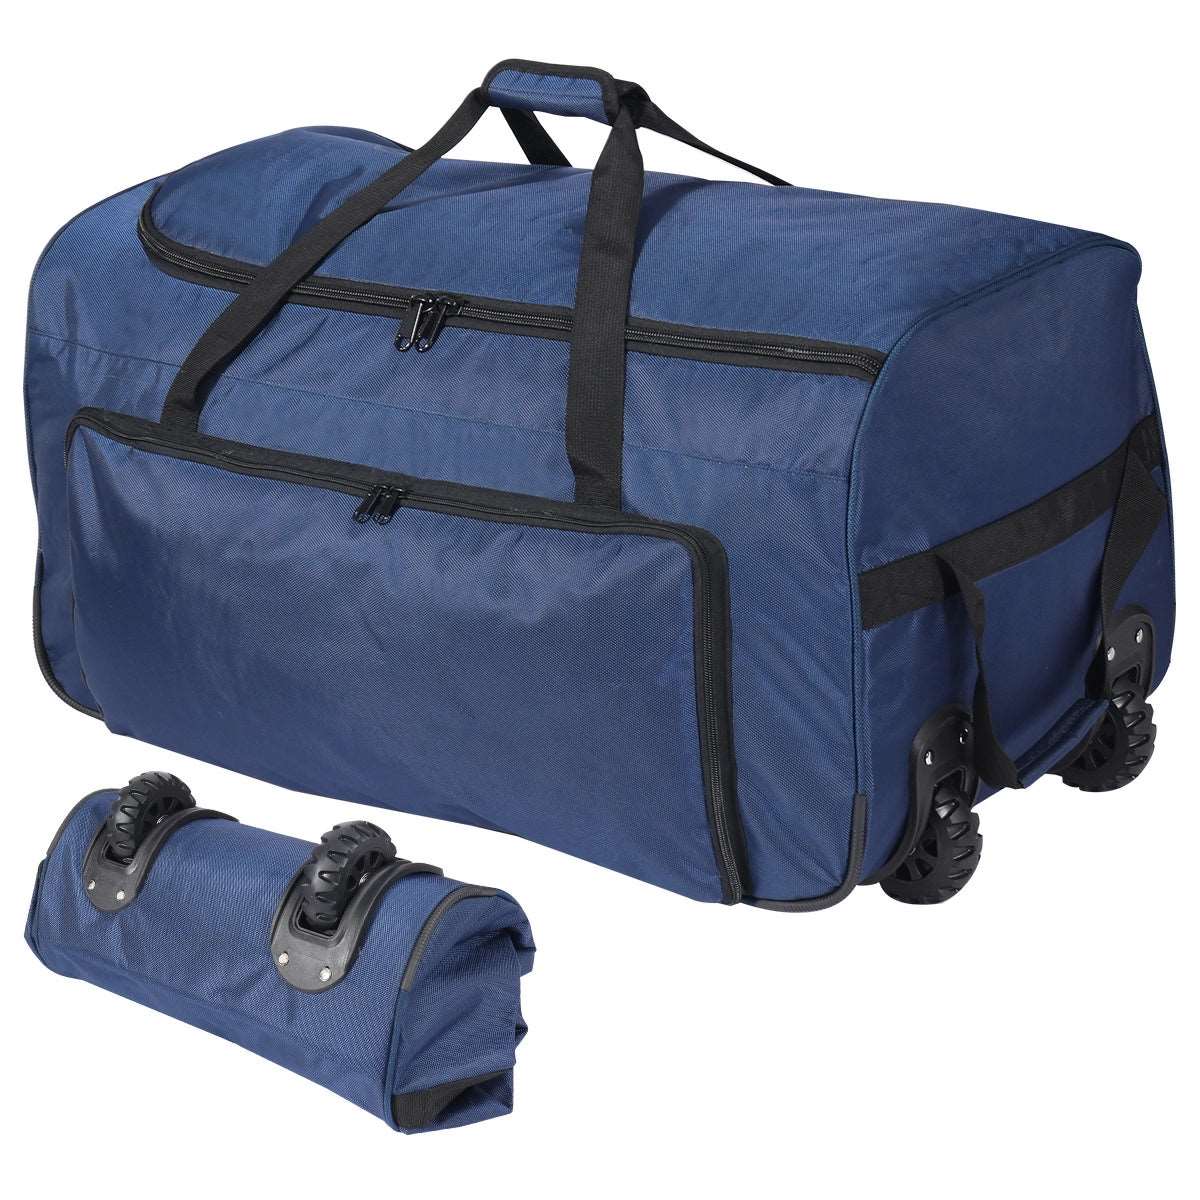 Portable Fishing Large Duffle Bag With Folding Rod, Reel, Pole, And Tackle  Compartments Ideal For Outdoor Travel And Storage 231129 From Xuan09,  $12.24